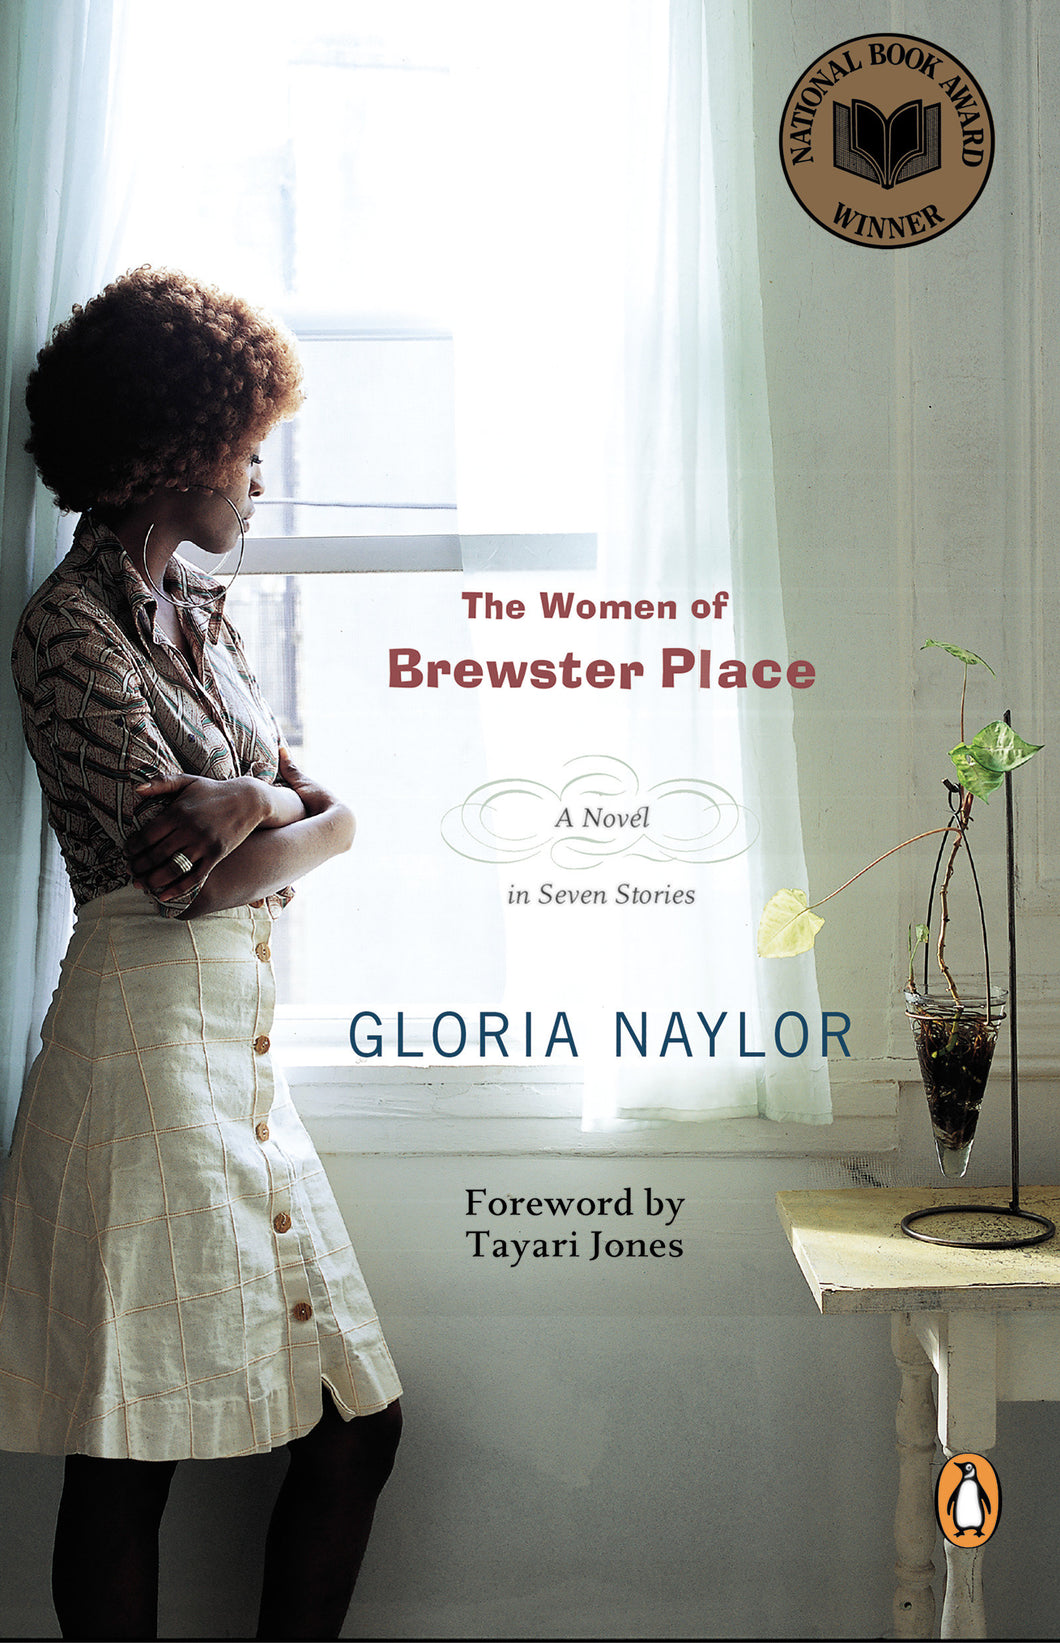 The Women of Brewster Place: A Novel in Seven Stories